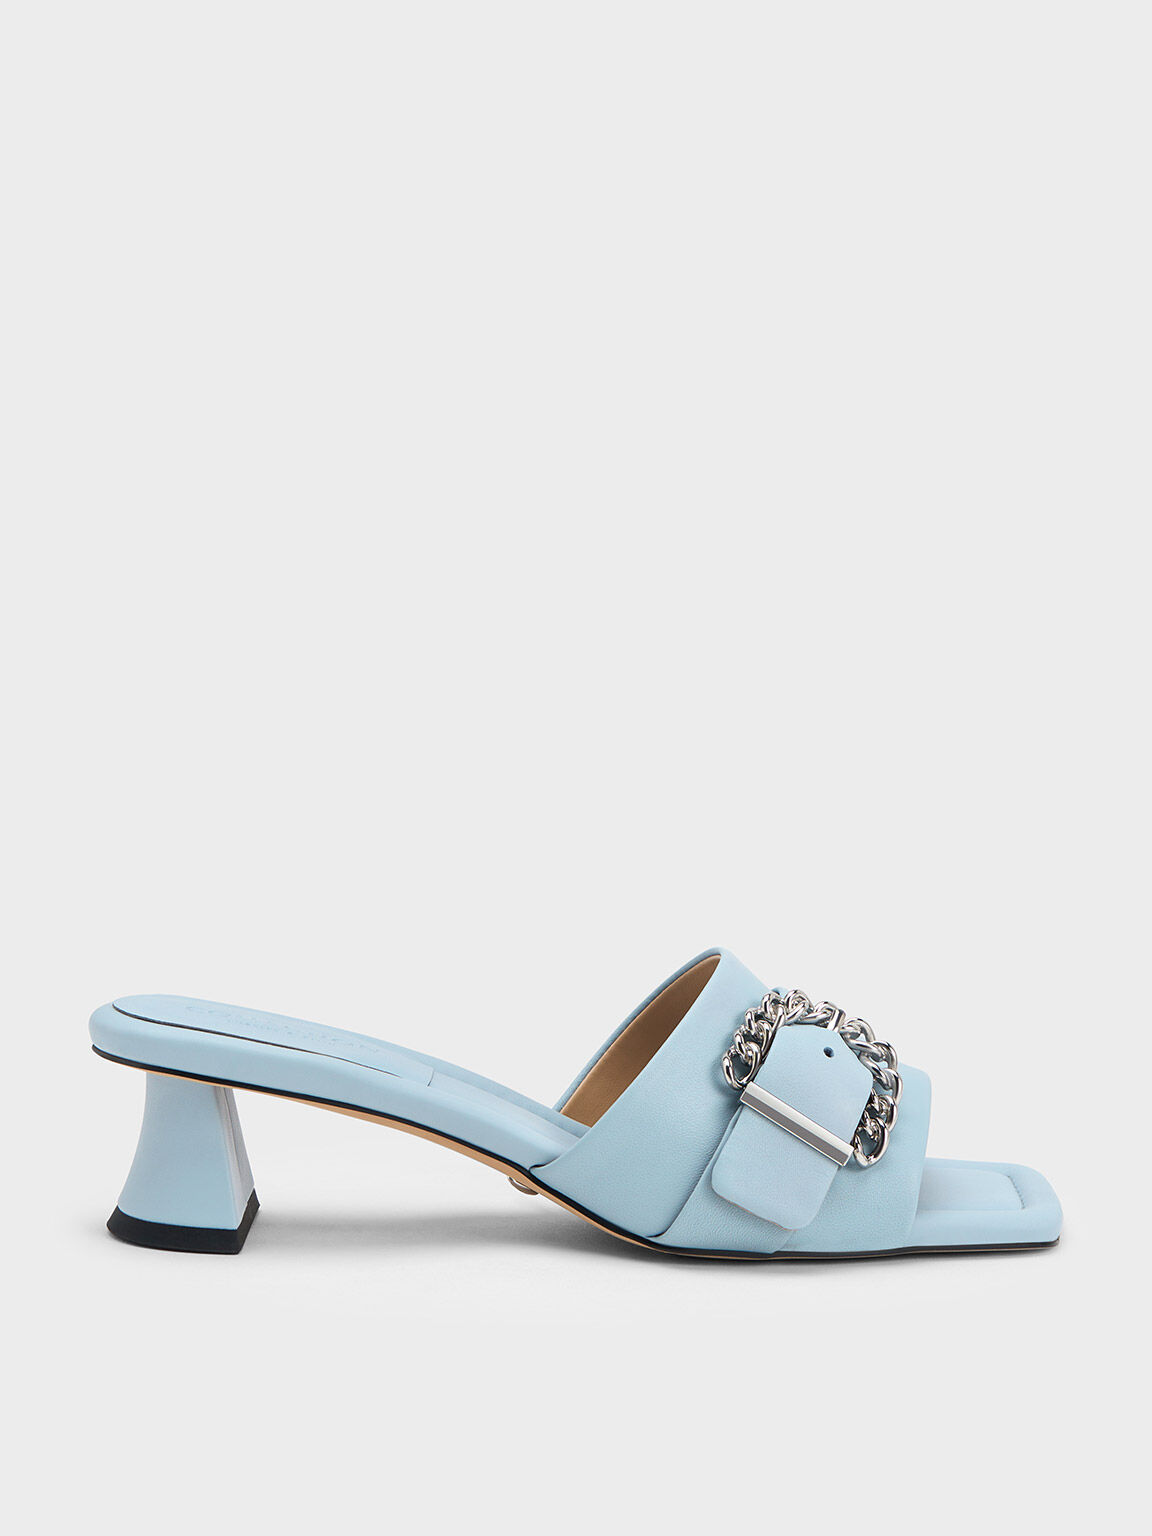 Chain-Buckled Leather Mules, Blue, hi-res